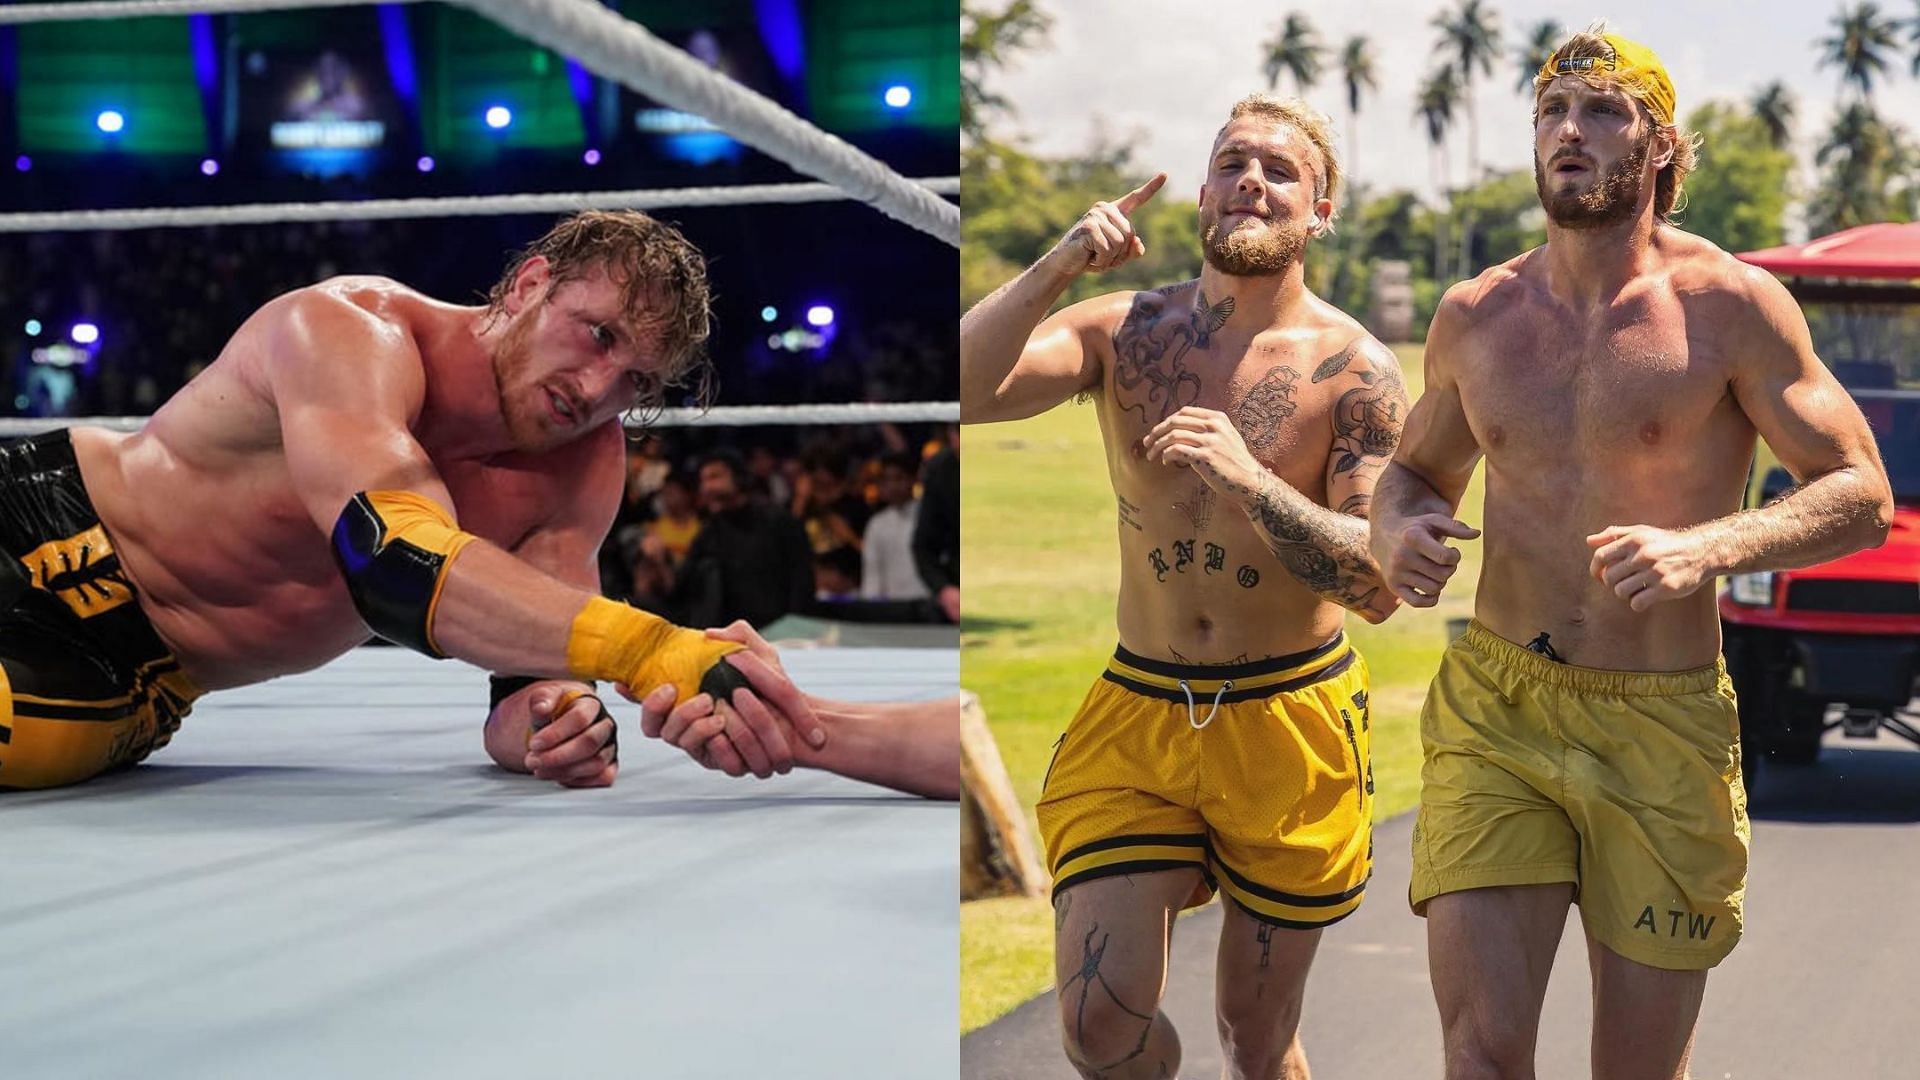 Logan Paul and Jake Paul will both be in action this weekend